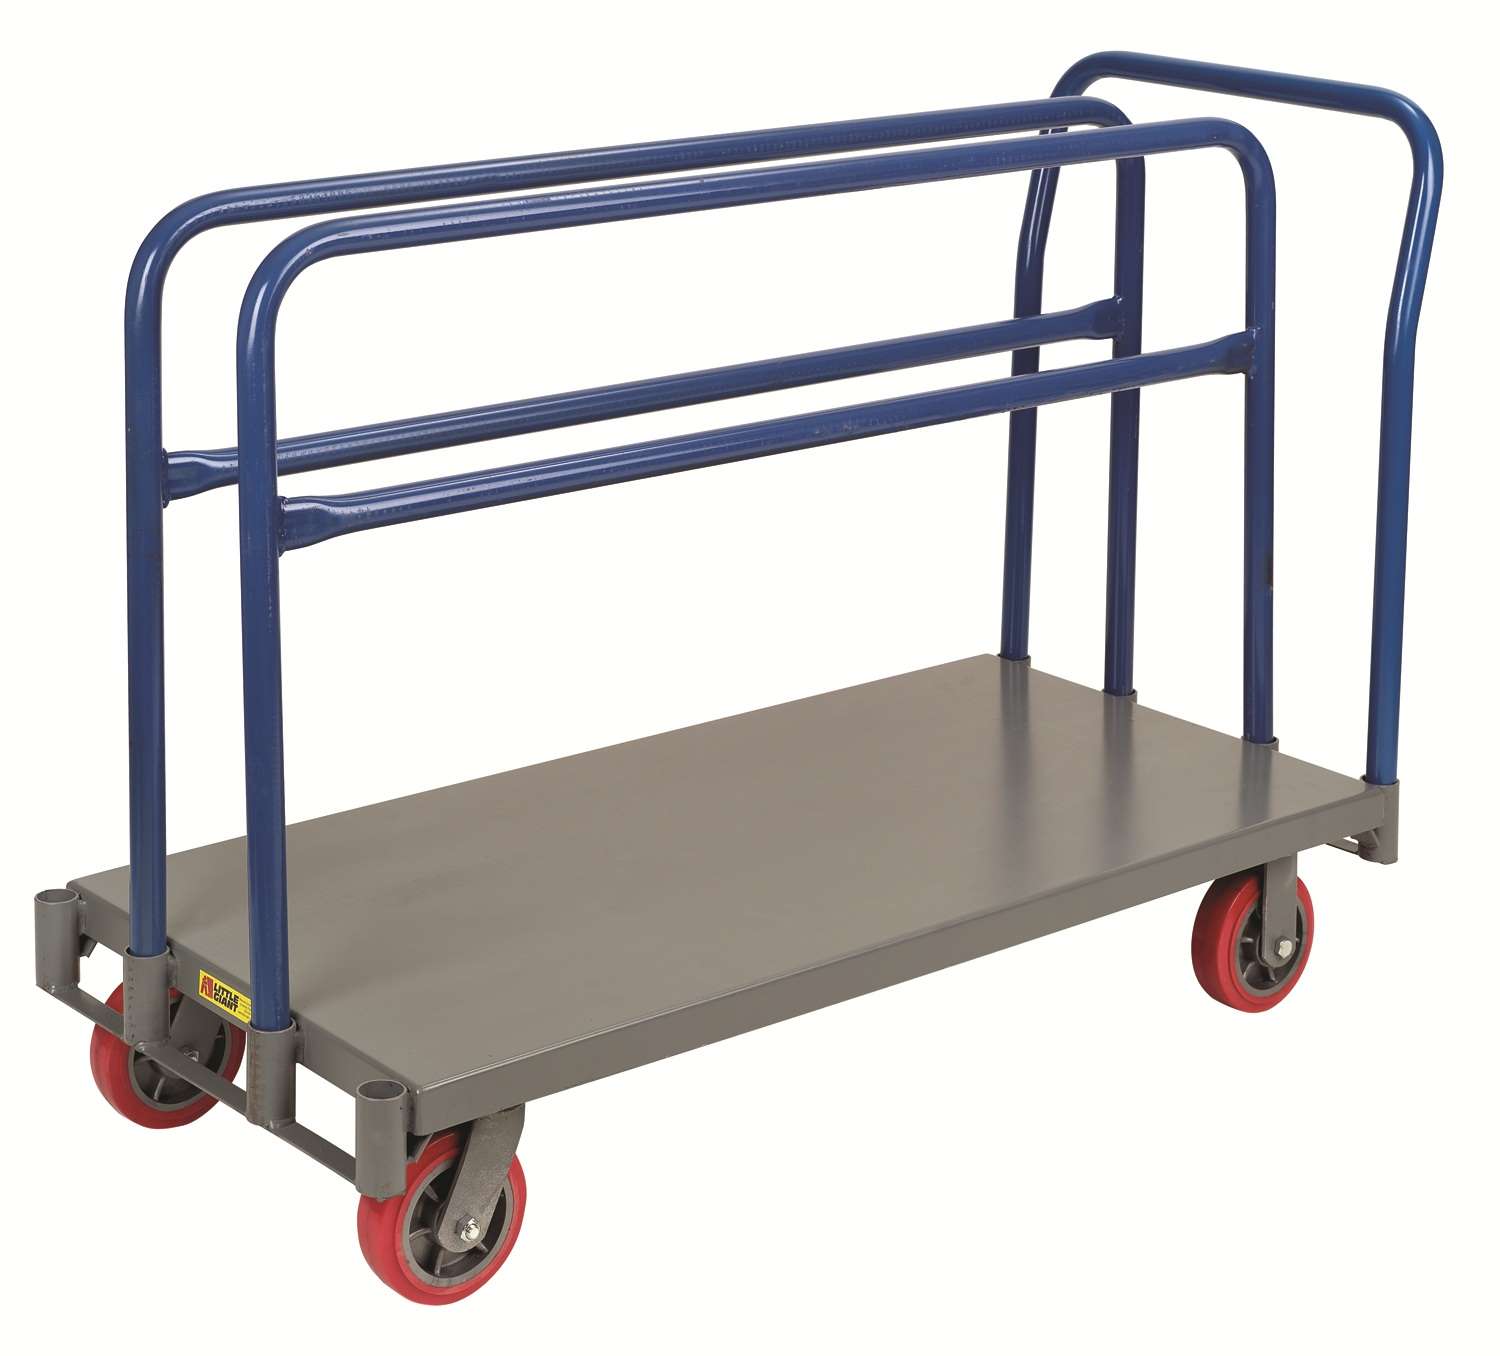 Little Giant, Adjustable sheet & panel truck, 3600 lbs capacity, 12ga deck, 2 uprights extend 27" above deck, 4 upright positions, 2 rigid and 2 swivel casters, 6" wheels, Overall height 36", Additional uprights available